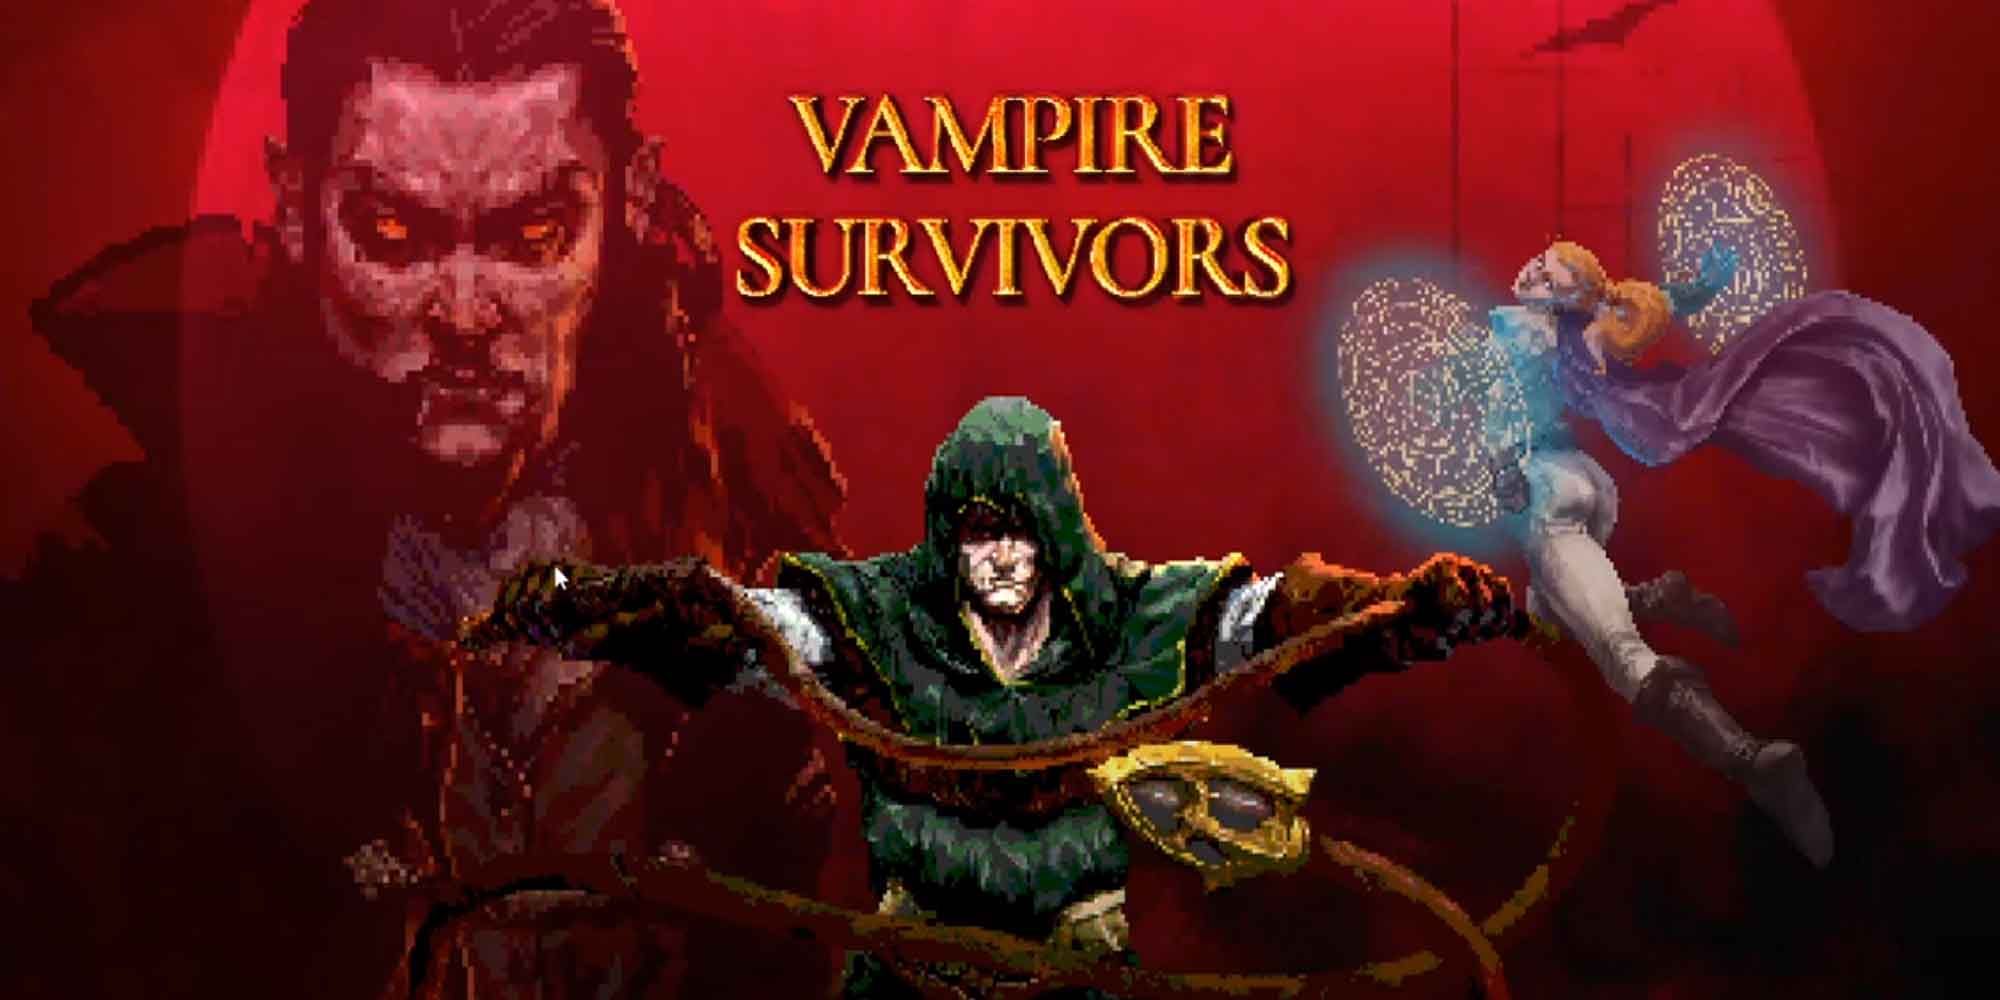 Moongolow - Vampire Survivors Guide - IGN